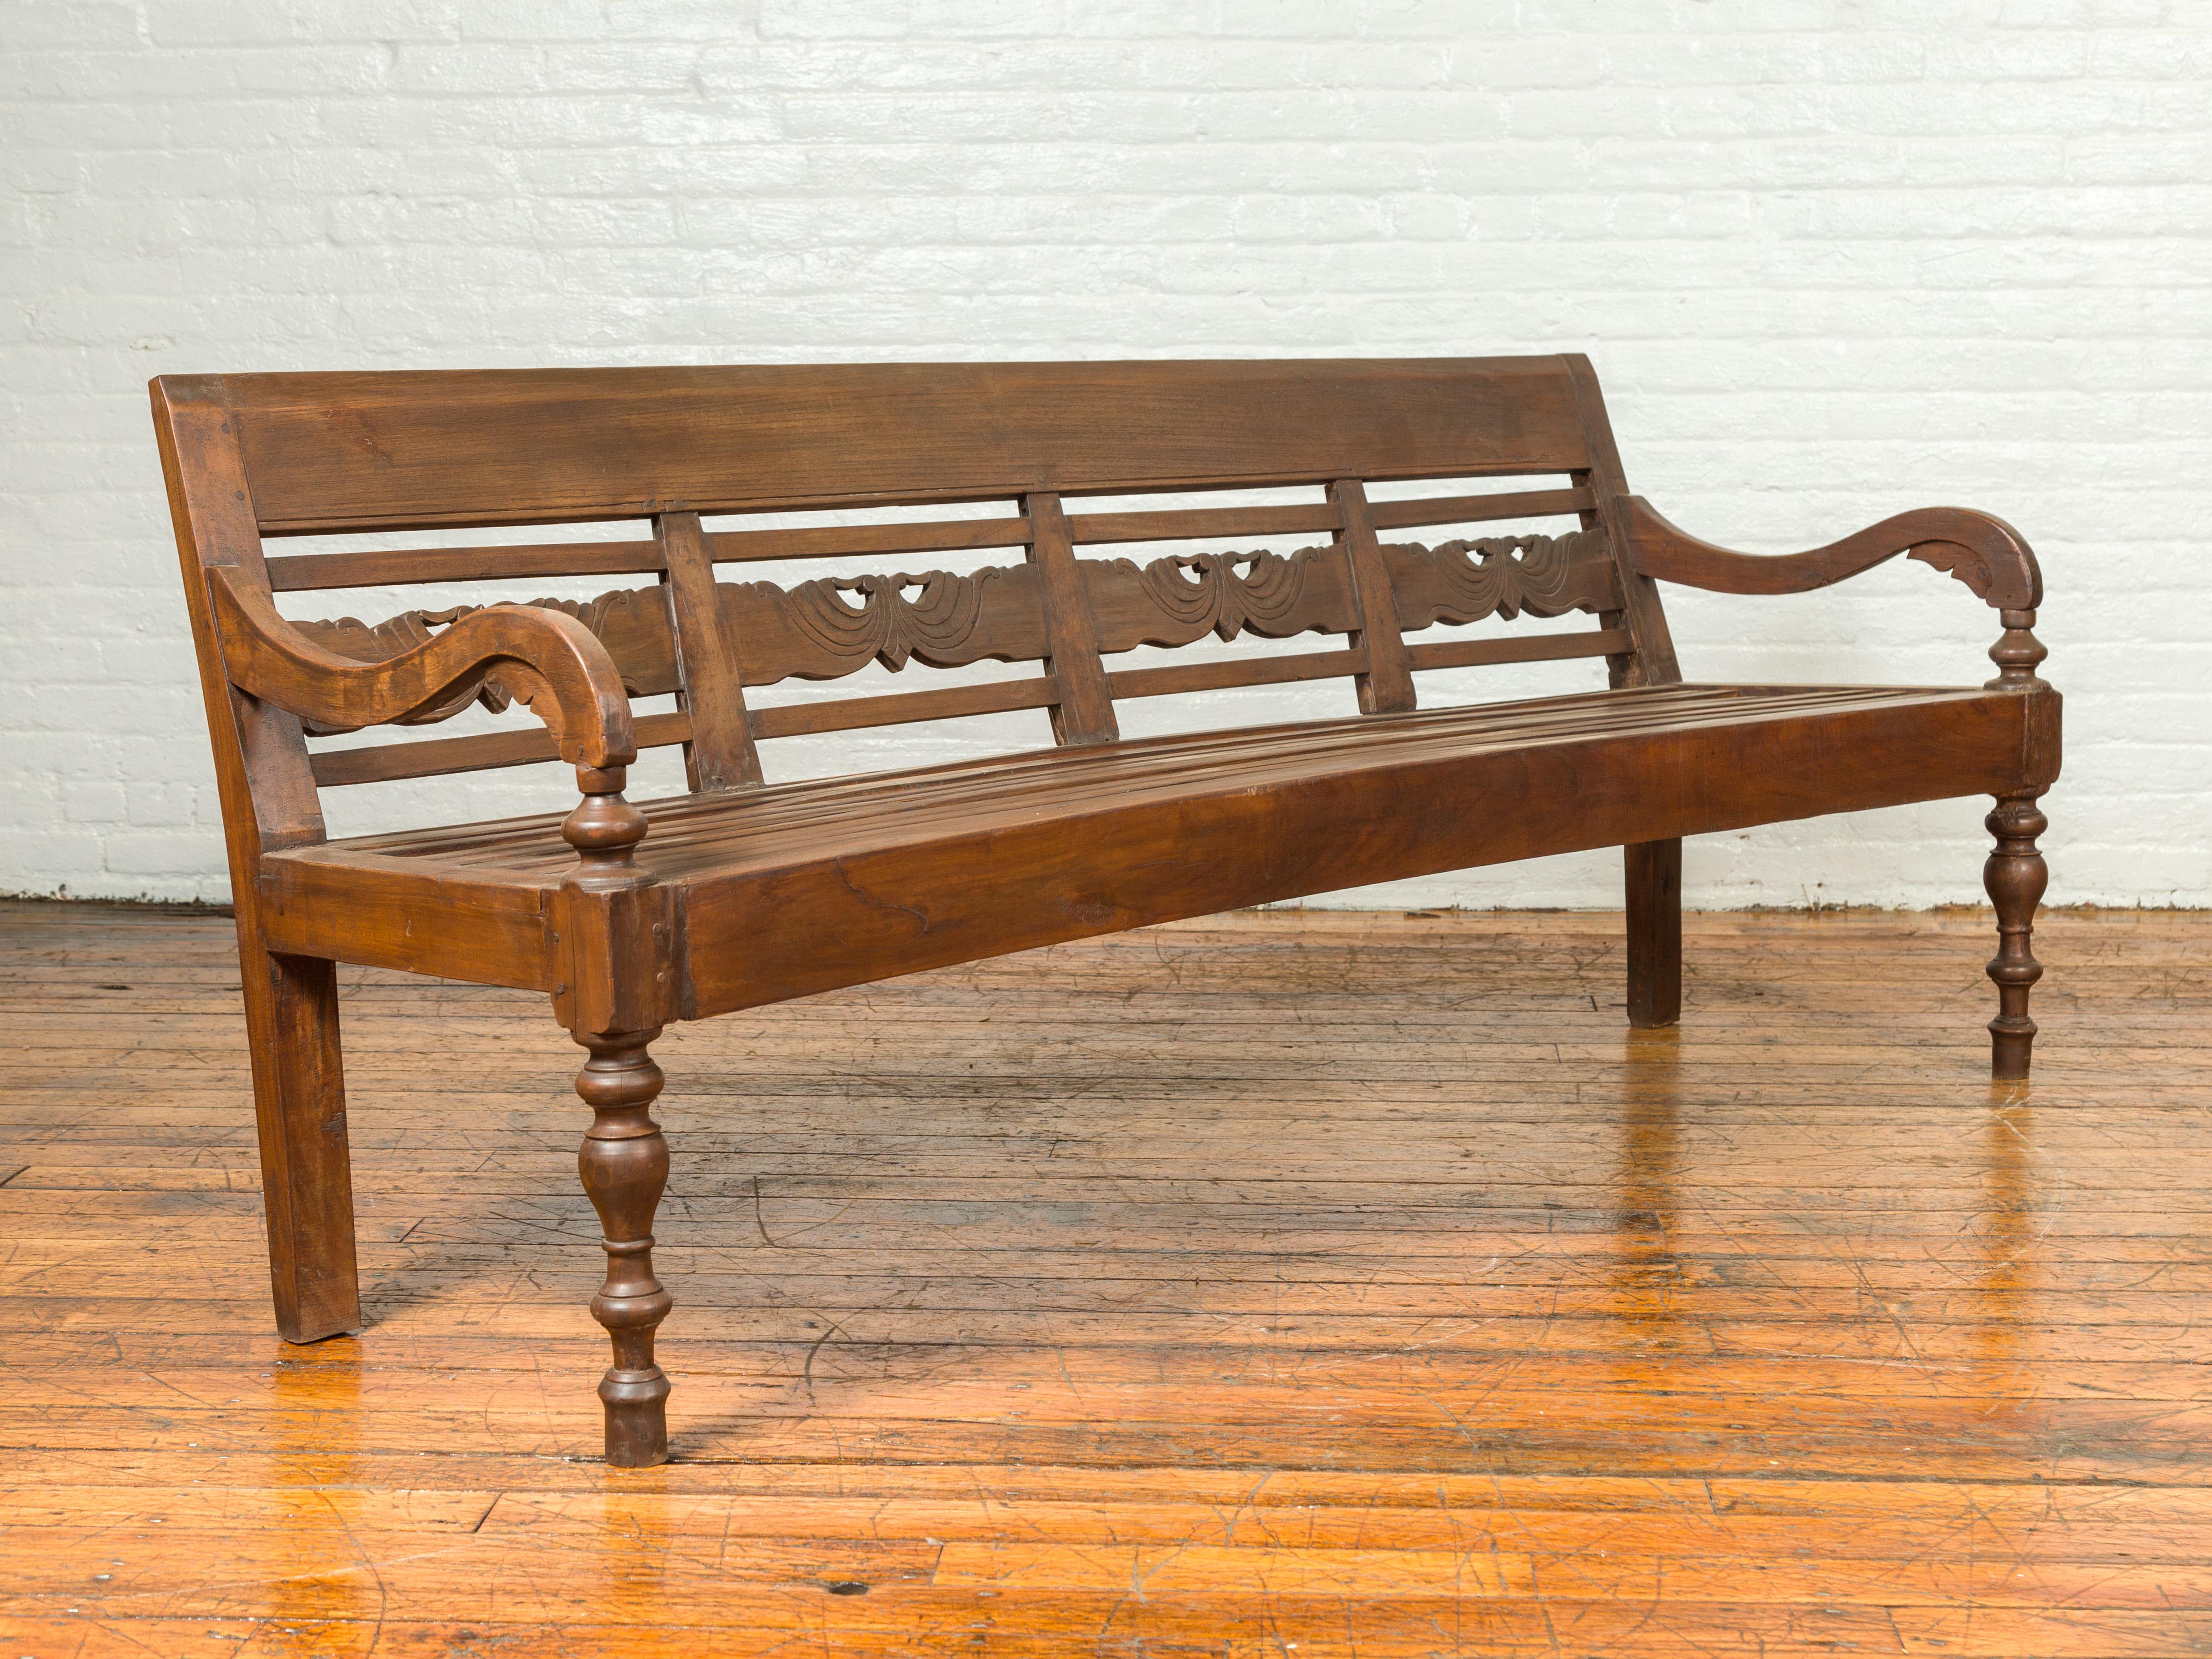 carved wooden benches